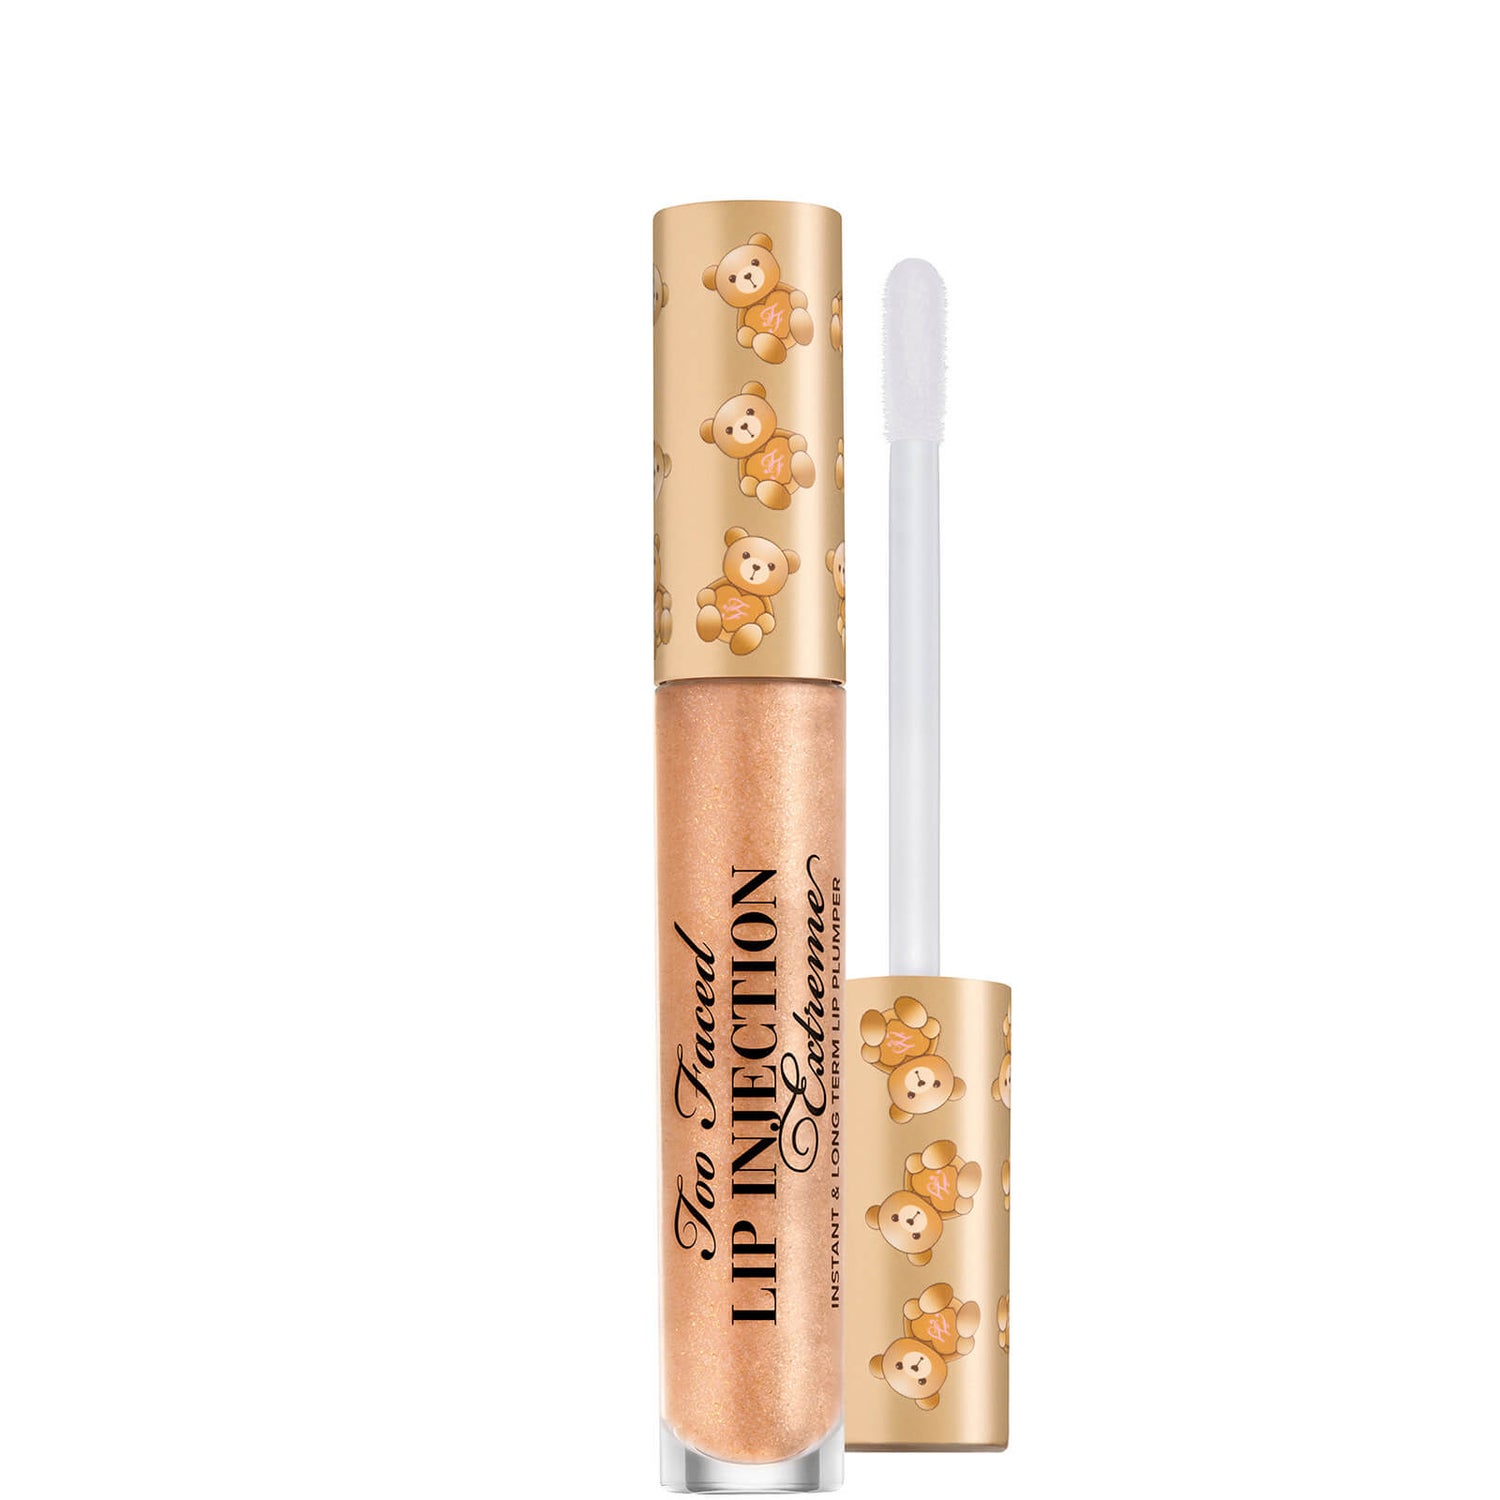 Too Faced Limited Edition Teddy Bare Lip Injection Extreme Lip Plumper - Bee Sting 4g